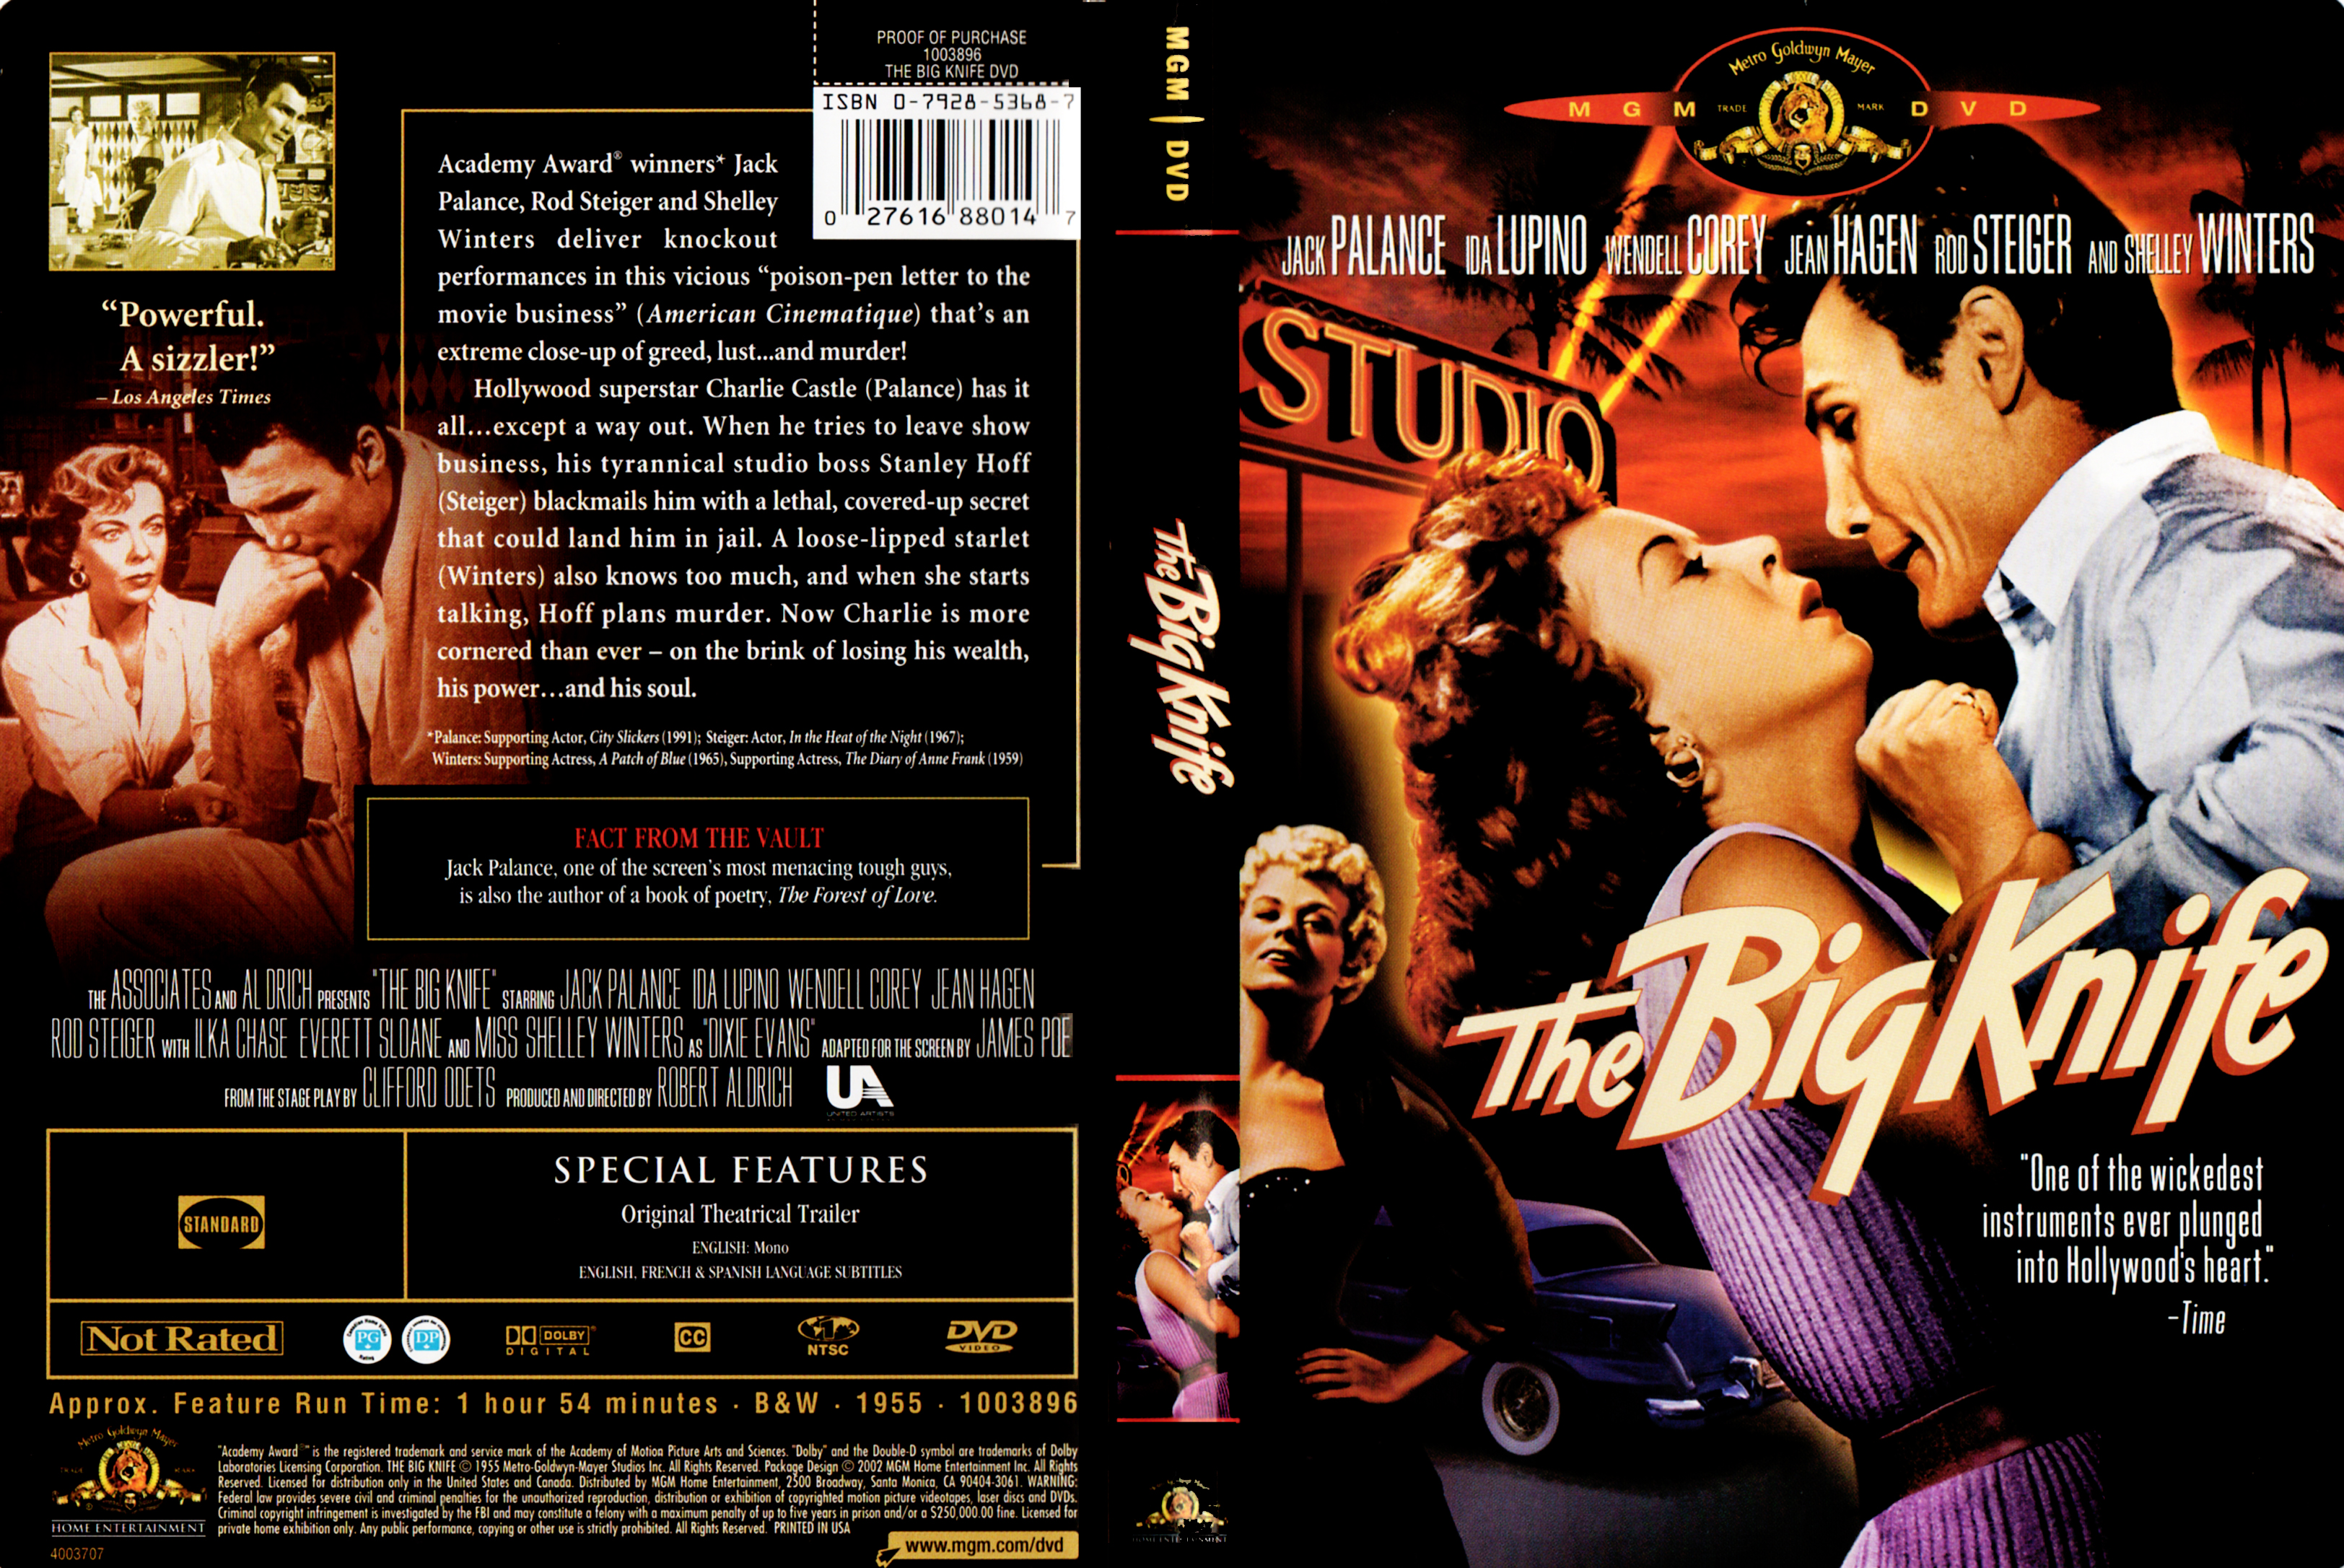 Jaquette DVD The big knife